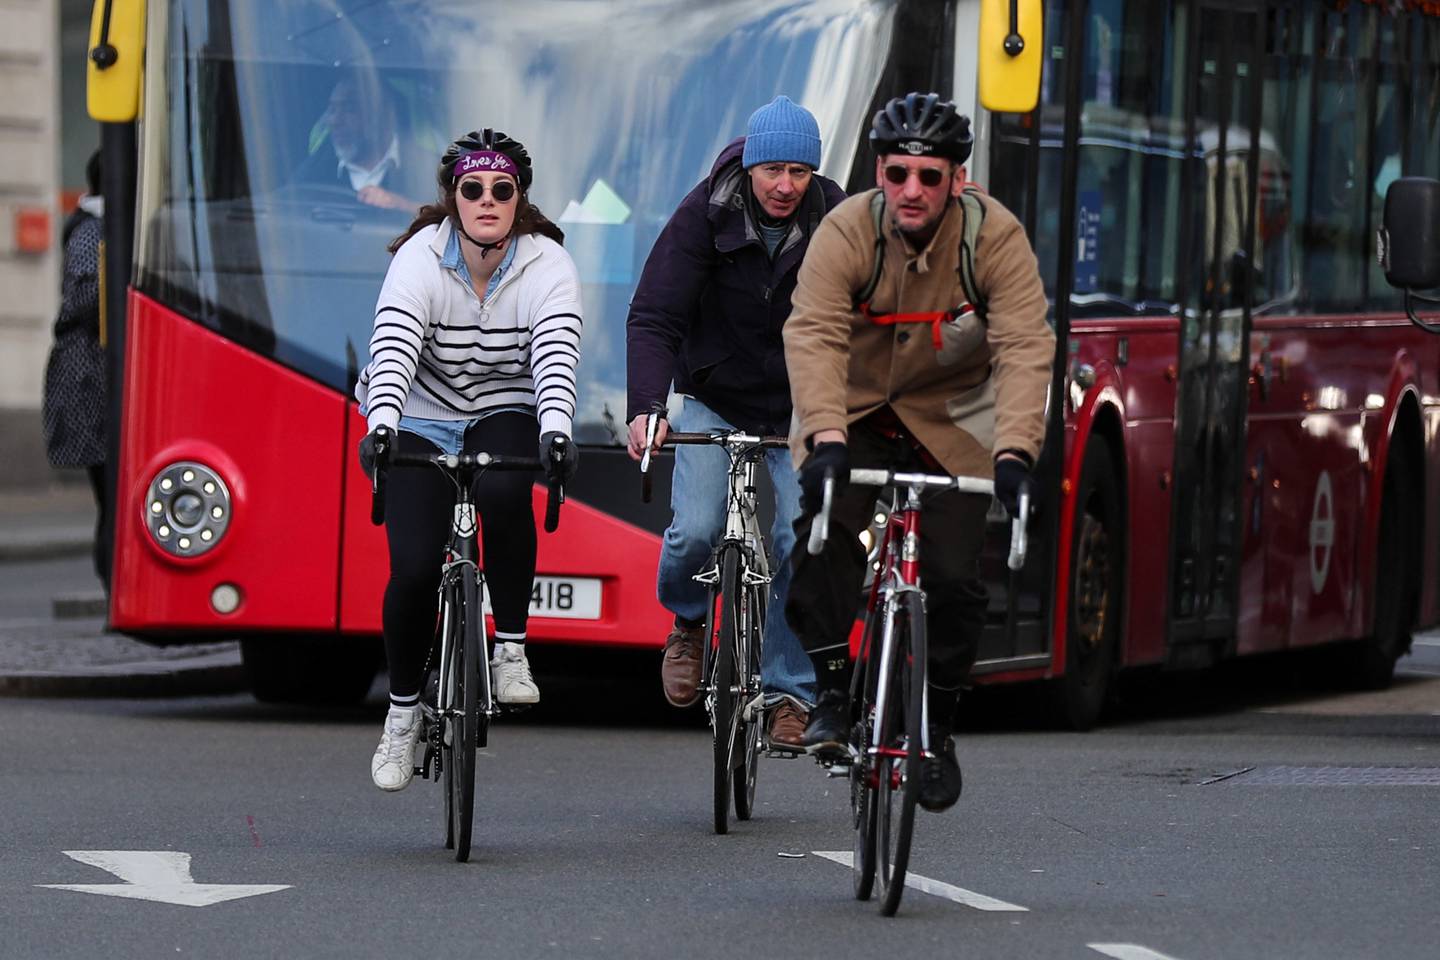 Cyclists in London have urged the mayor to reduce the risk posed to cyclists at the notorious Holborn gyratory. Photo: Reuters